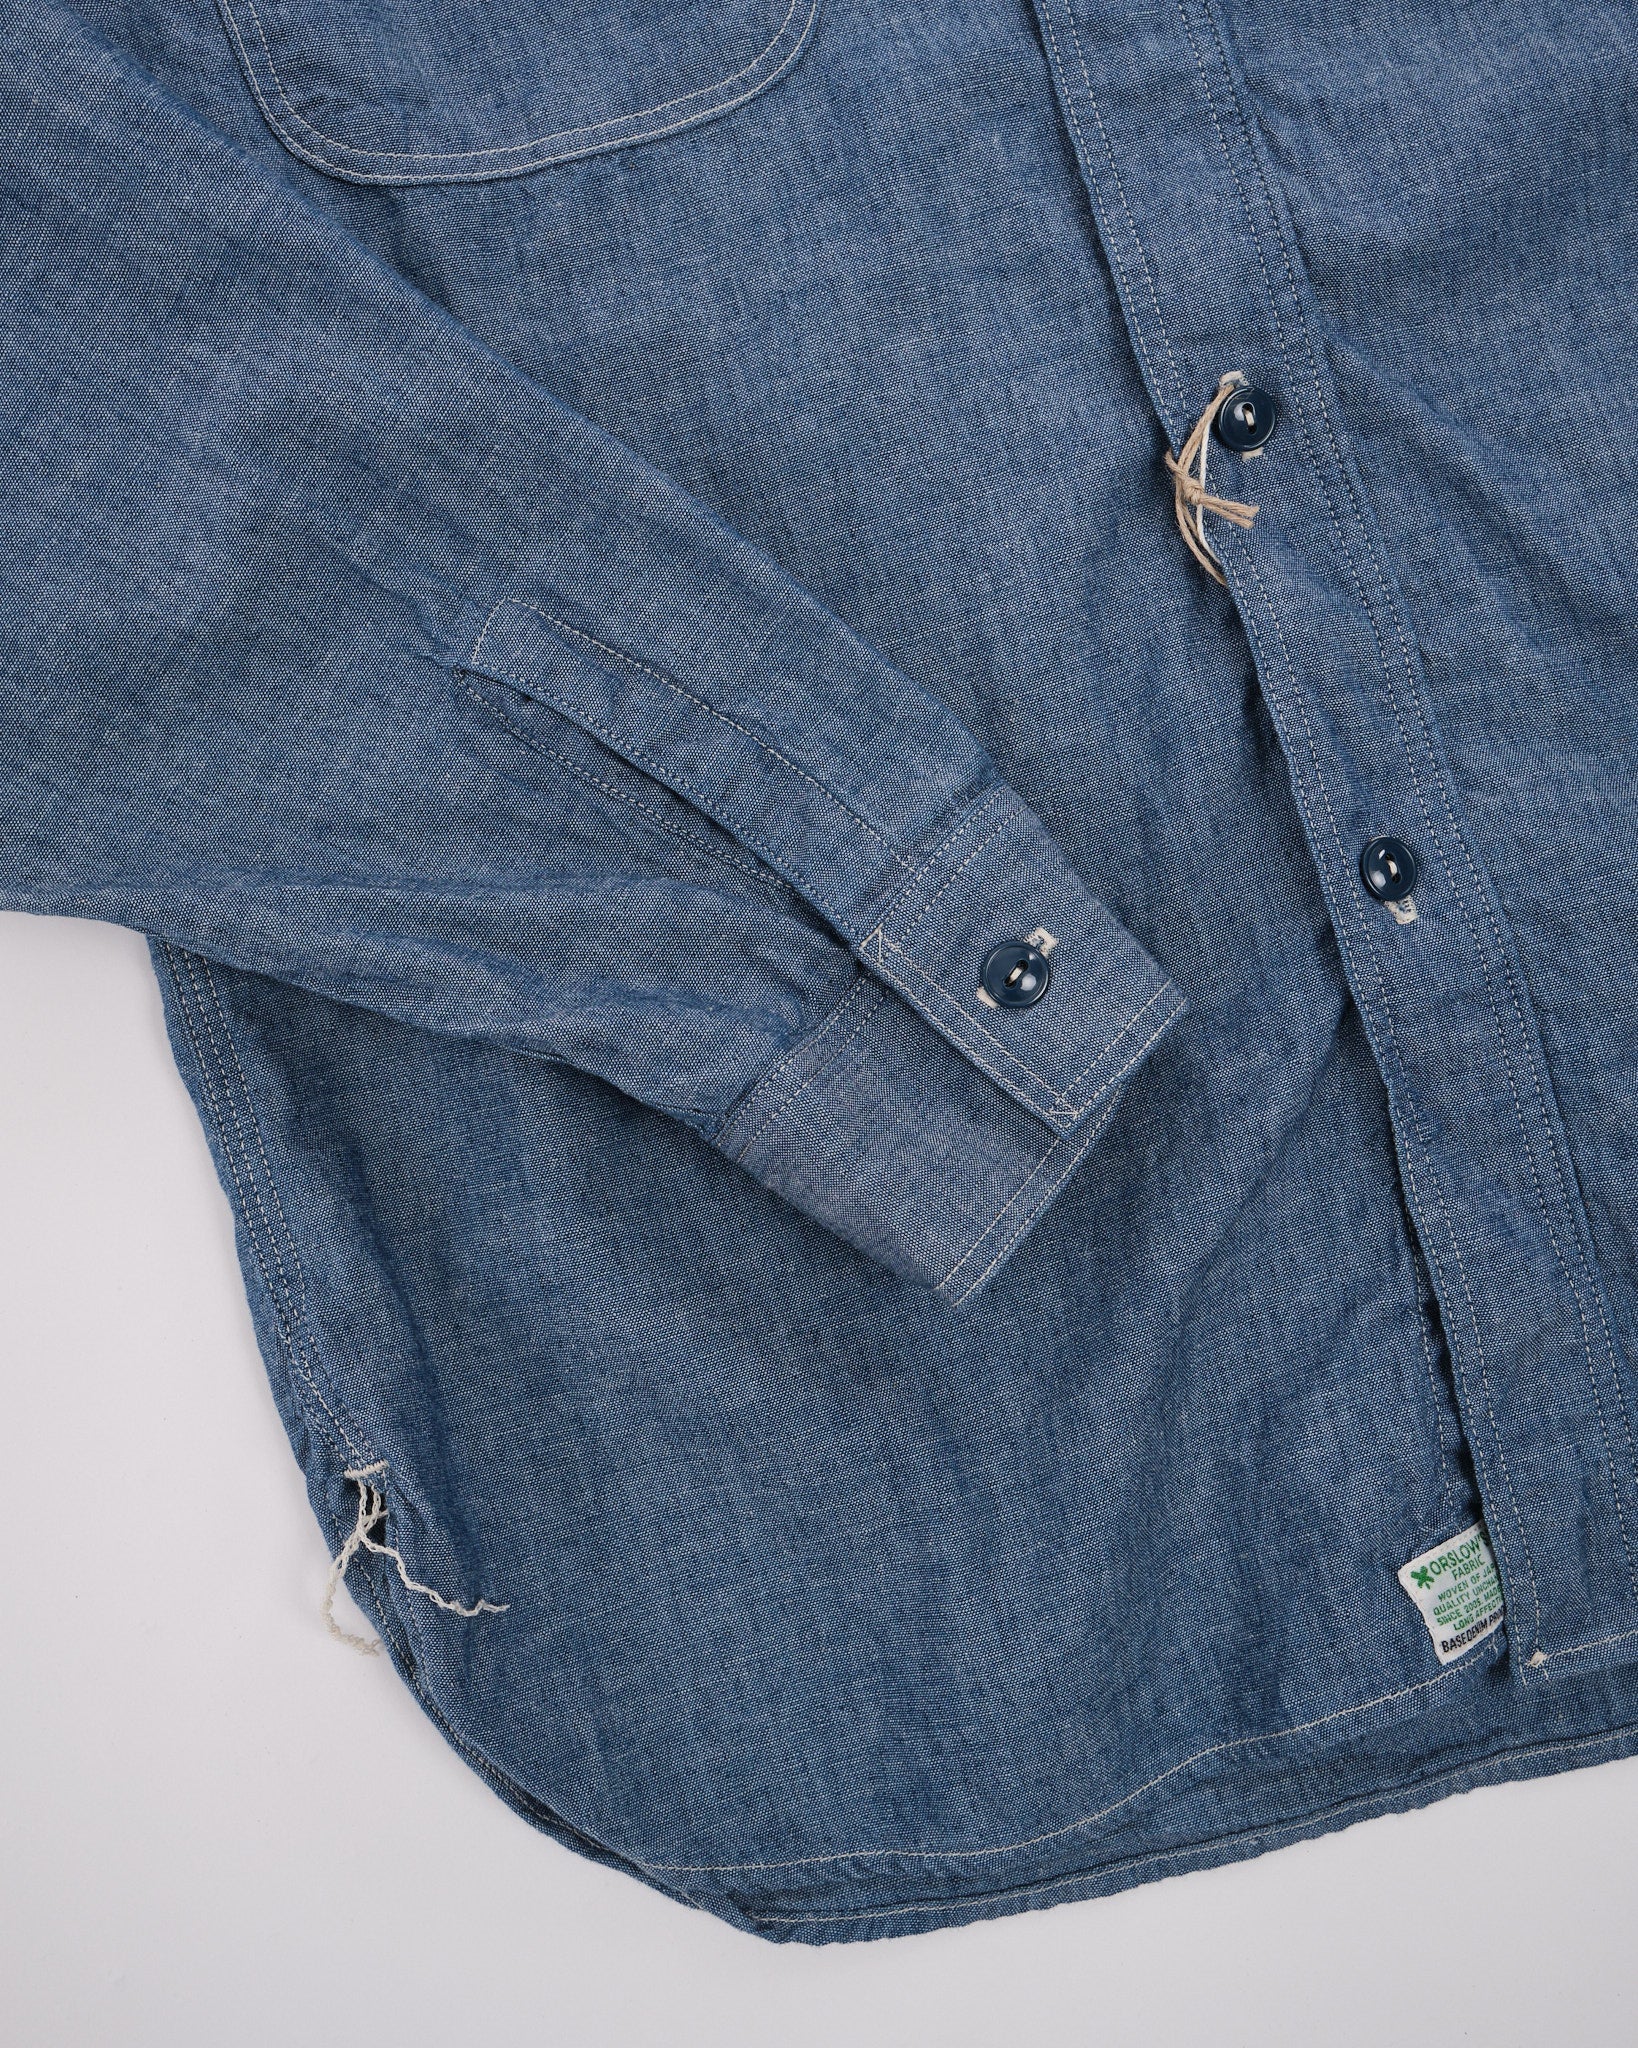 CHAMBRAY WORK SHIRT - Meadow